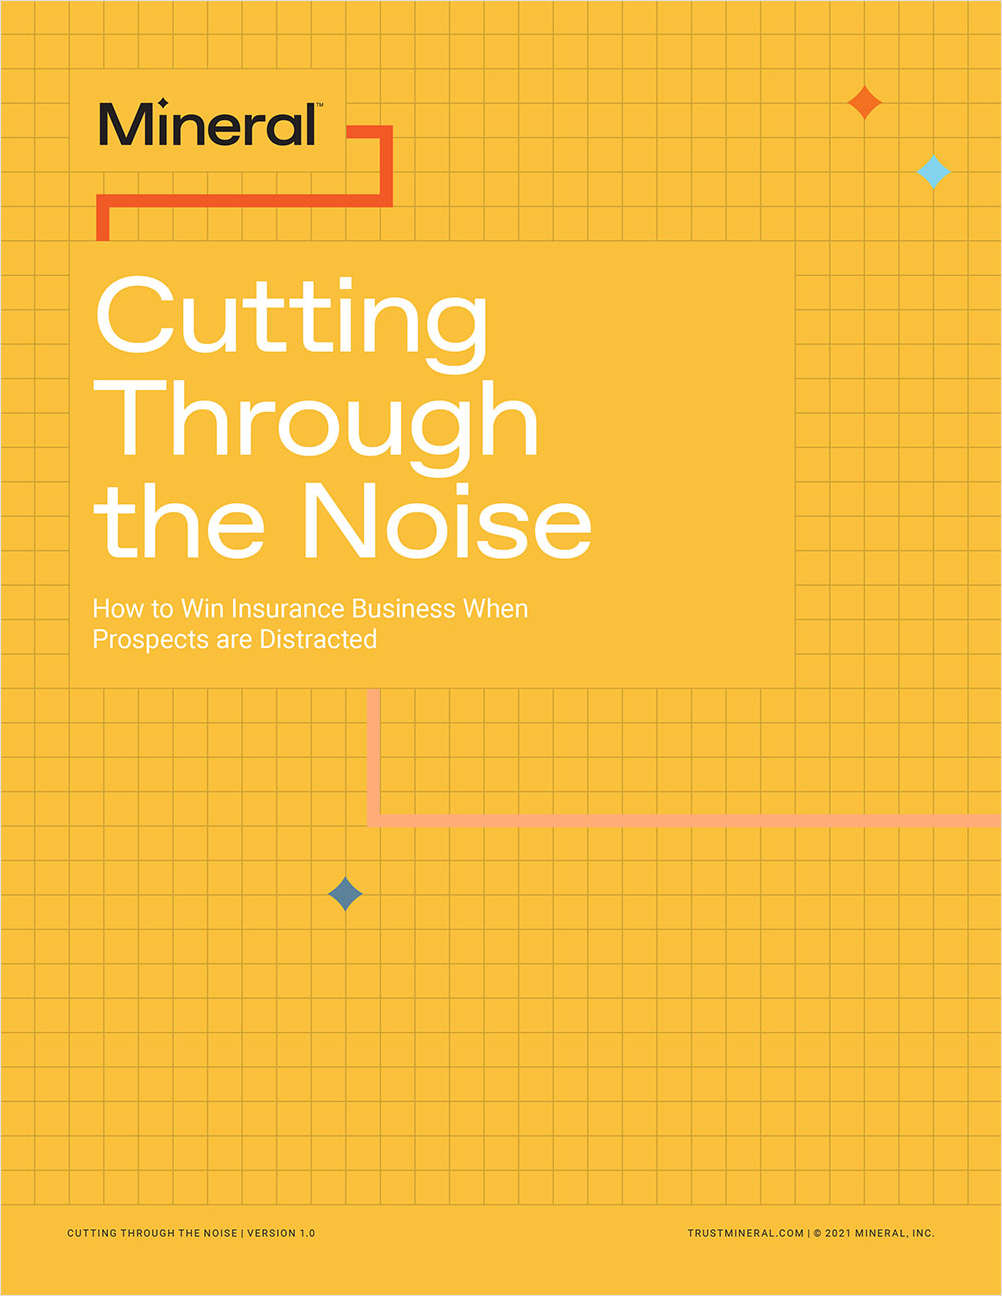 Cutting Through the Noise: How to Win Insurance Business When Prospects are Distracted